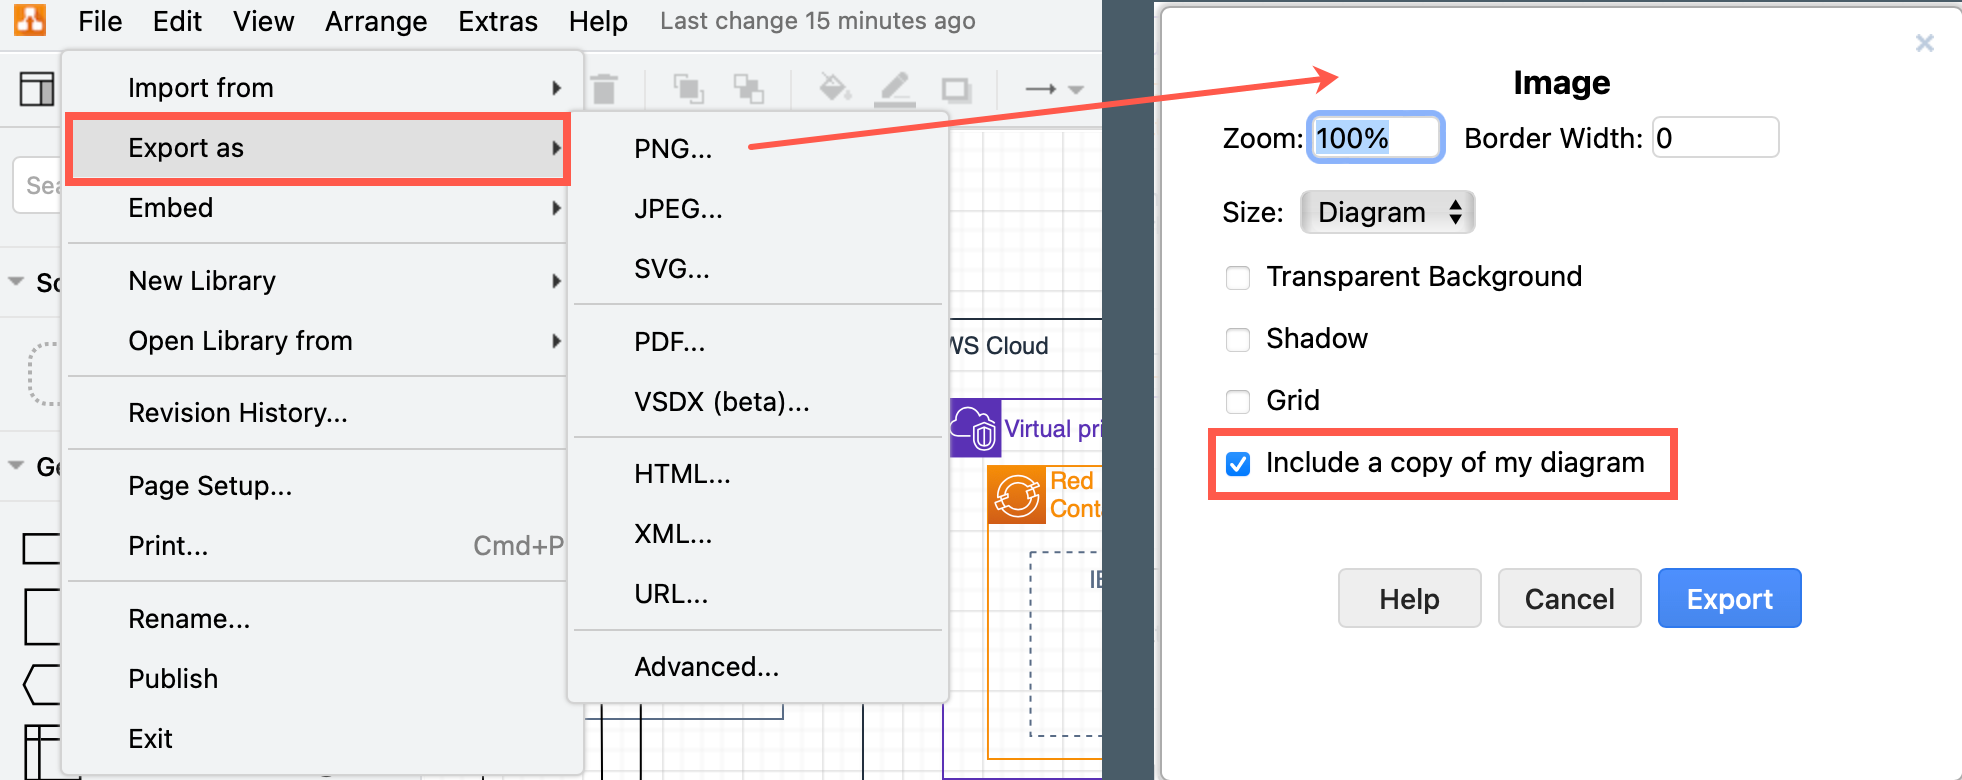 draw.io can export diagrams to many formats, and embed the diagram data inside PNG, SVG and PDF files